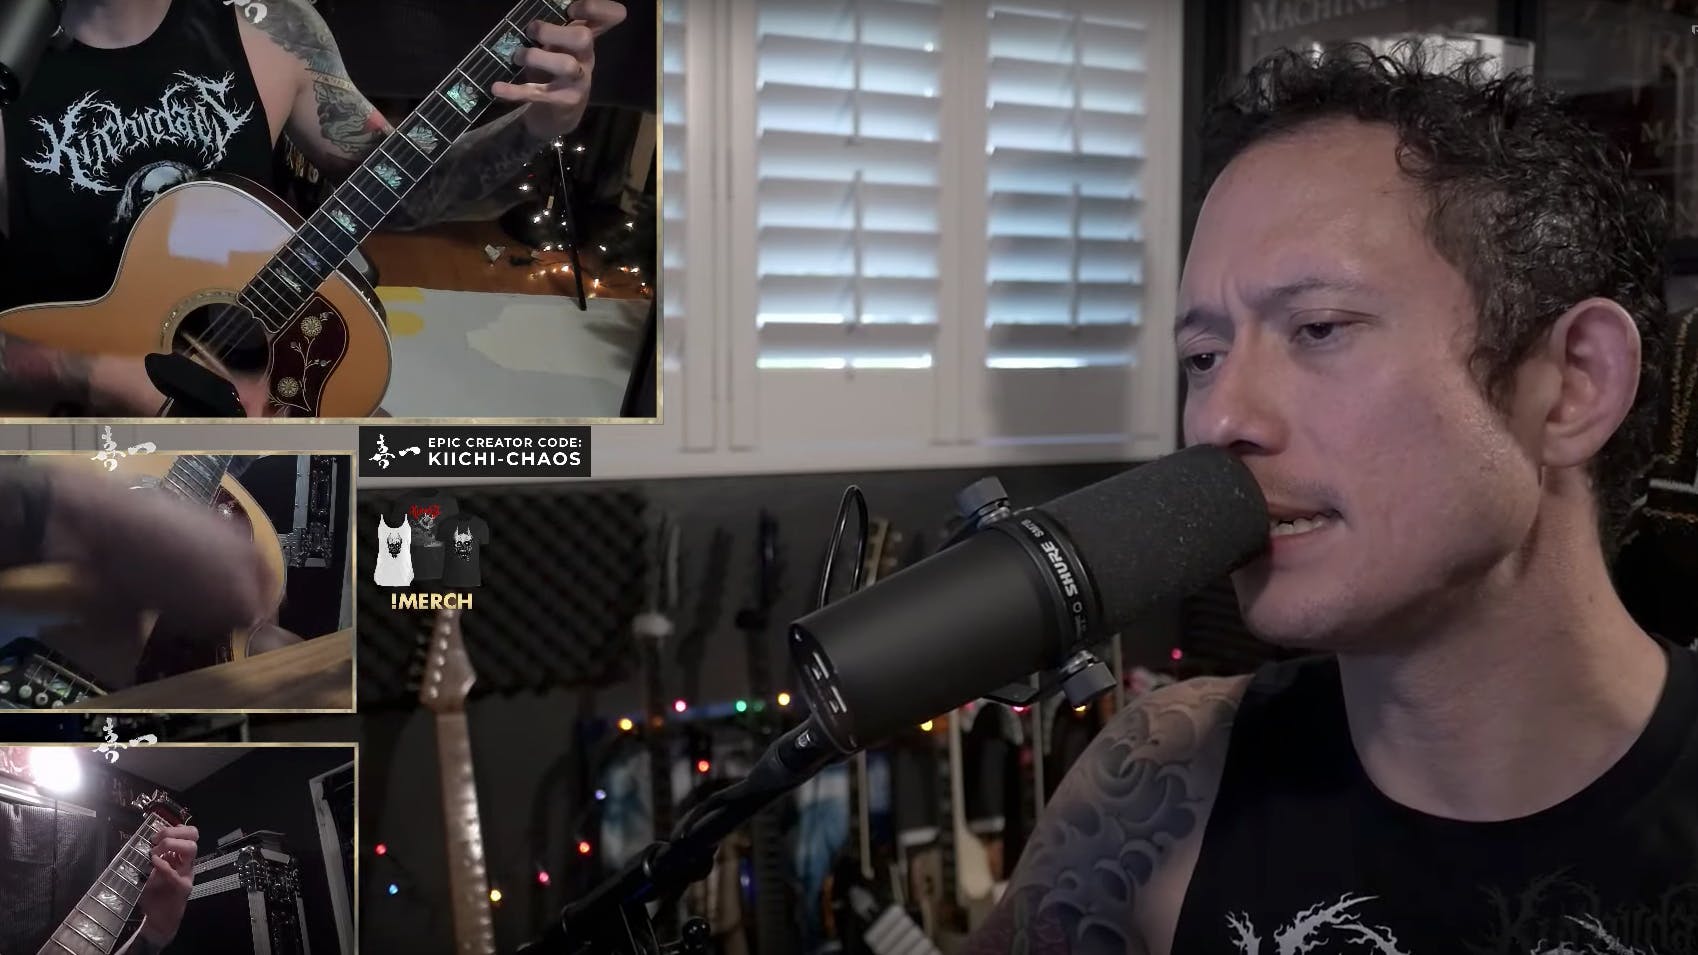 Watch Matt Heafy's Acoustic Cover Of Spiders By Slipknot